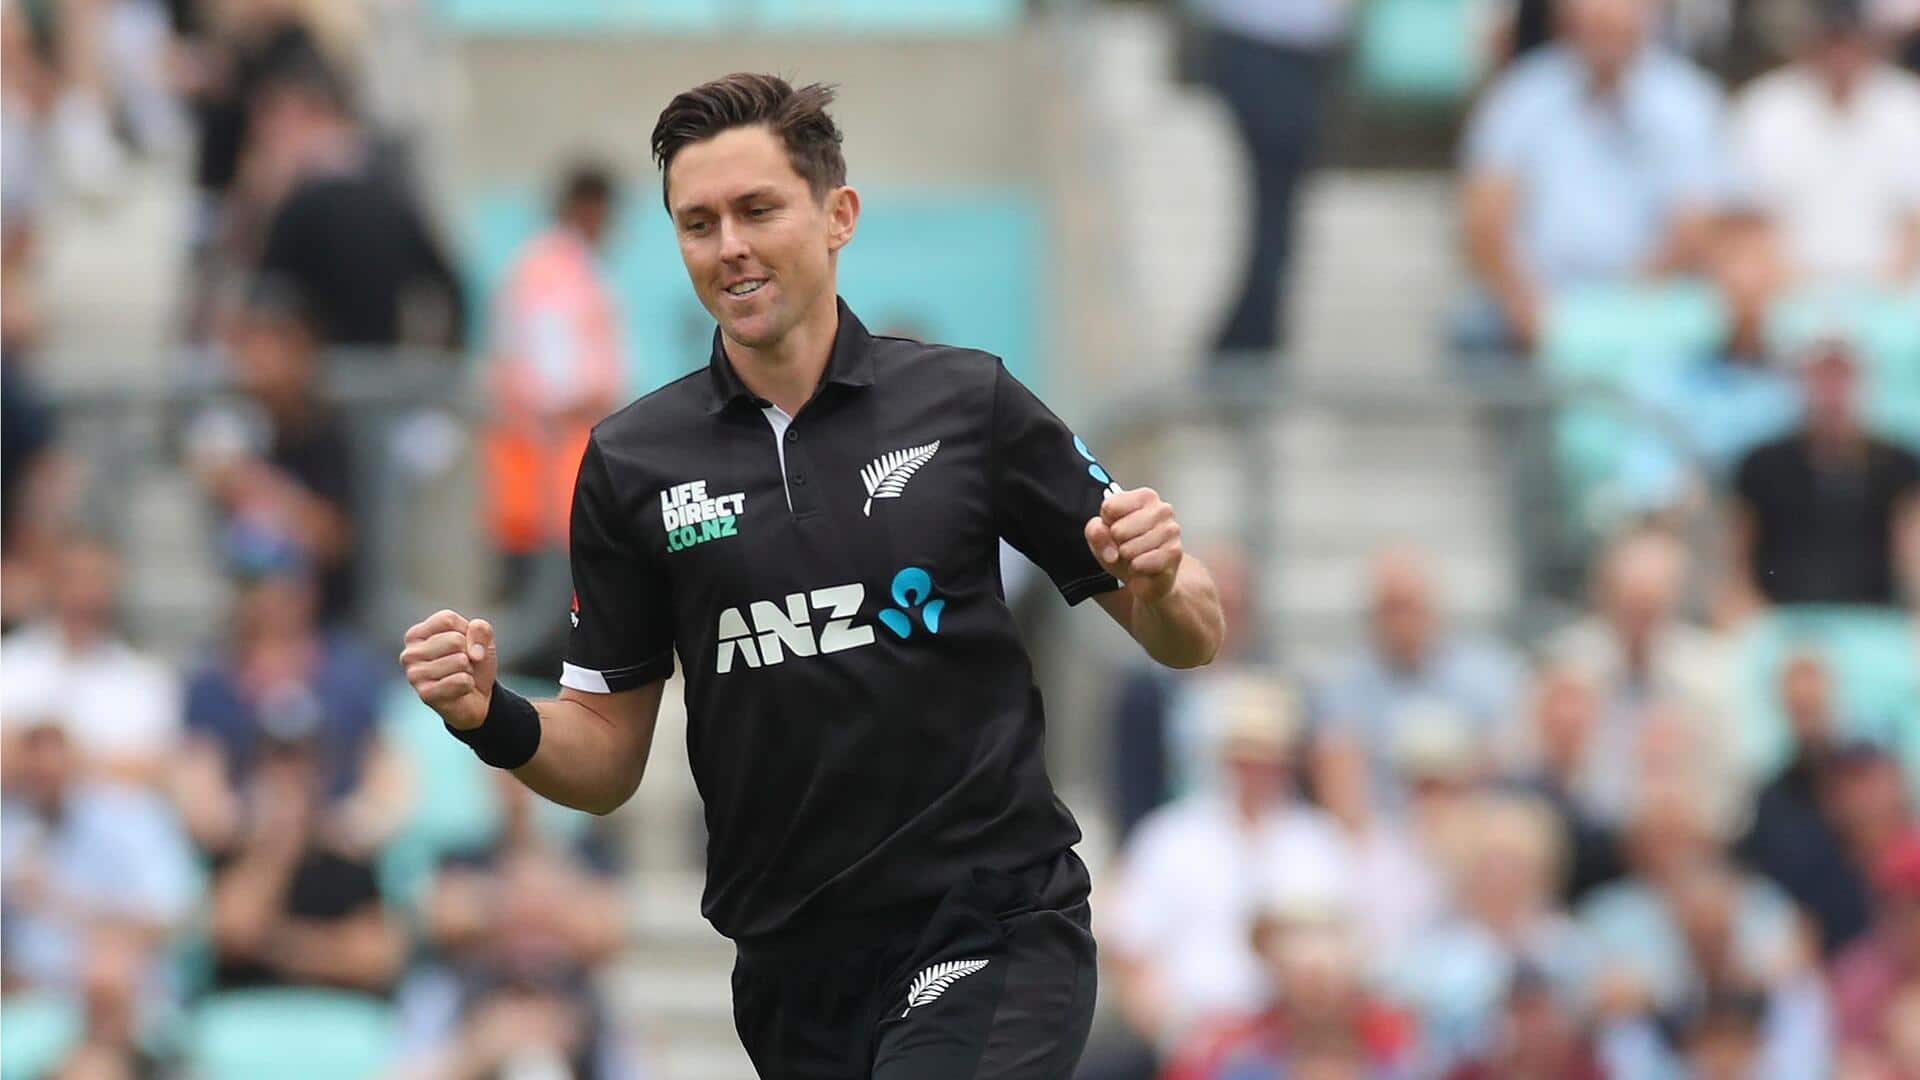 Trent Boult claims 5/51 versus England in 3rd ODI: Stats